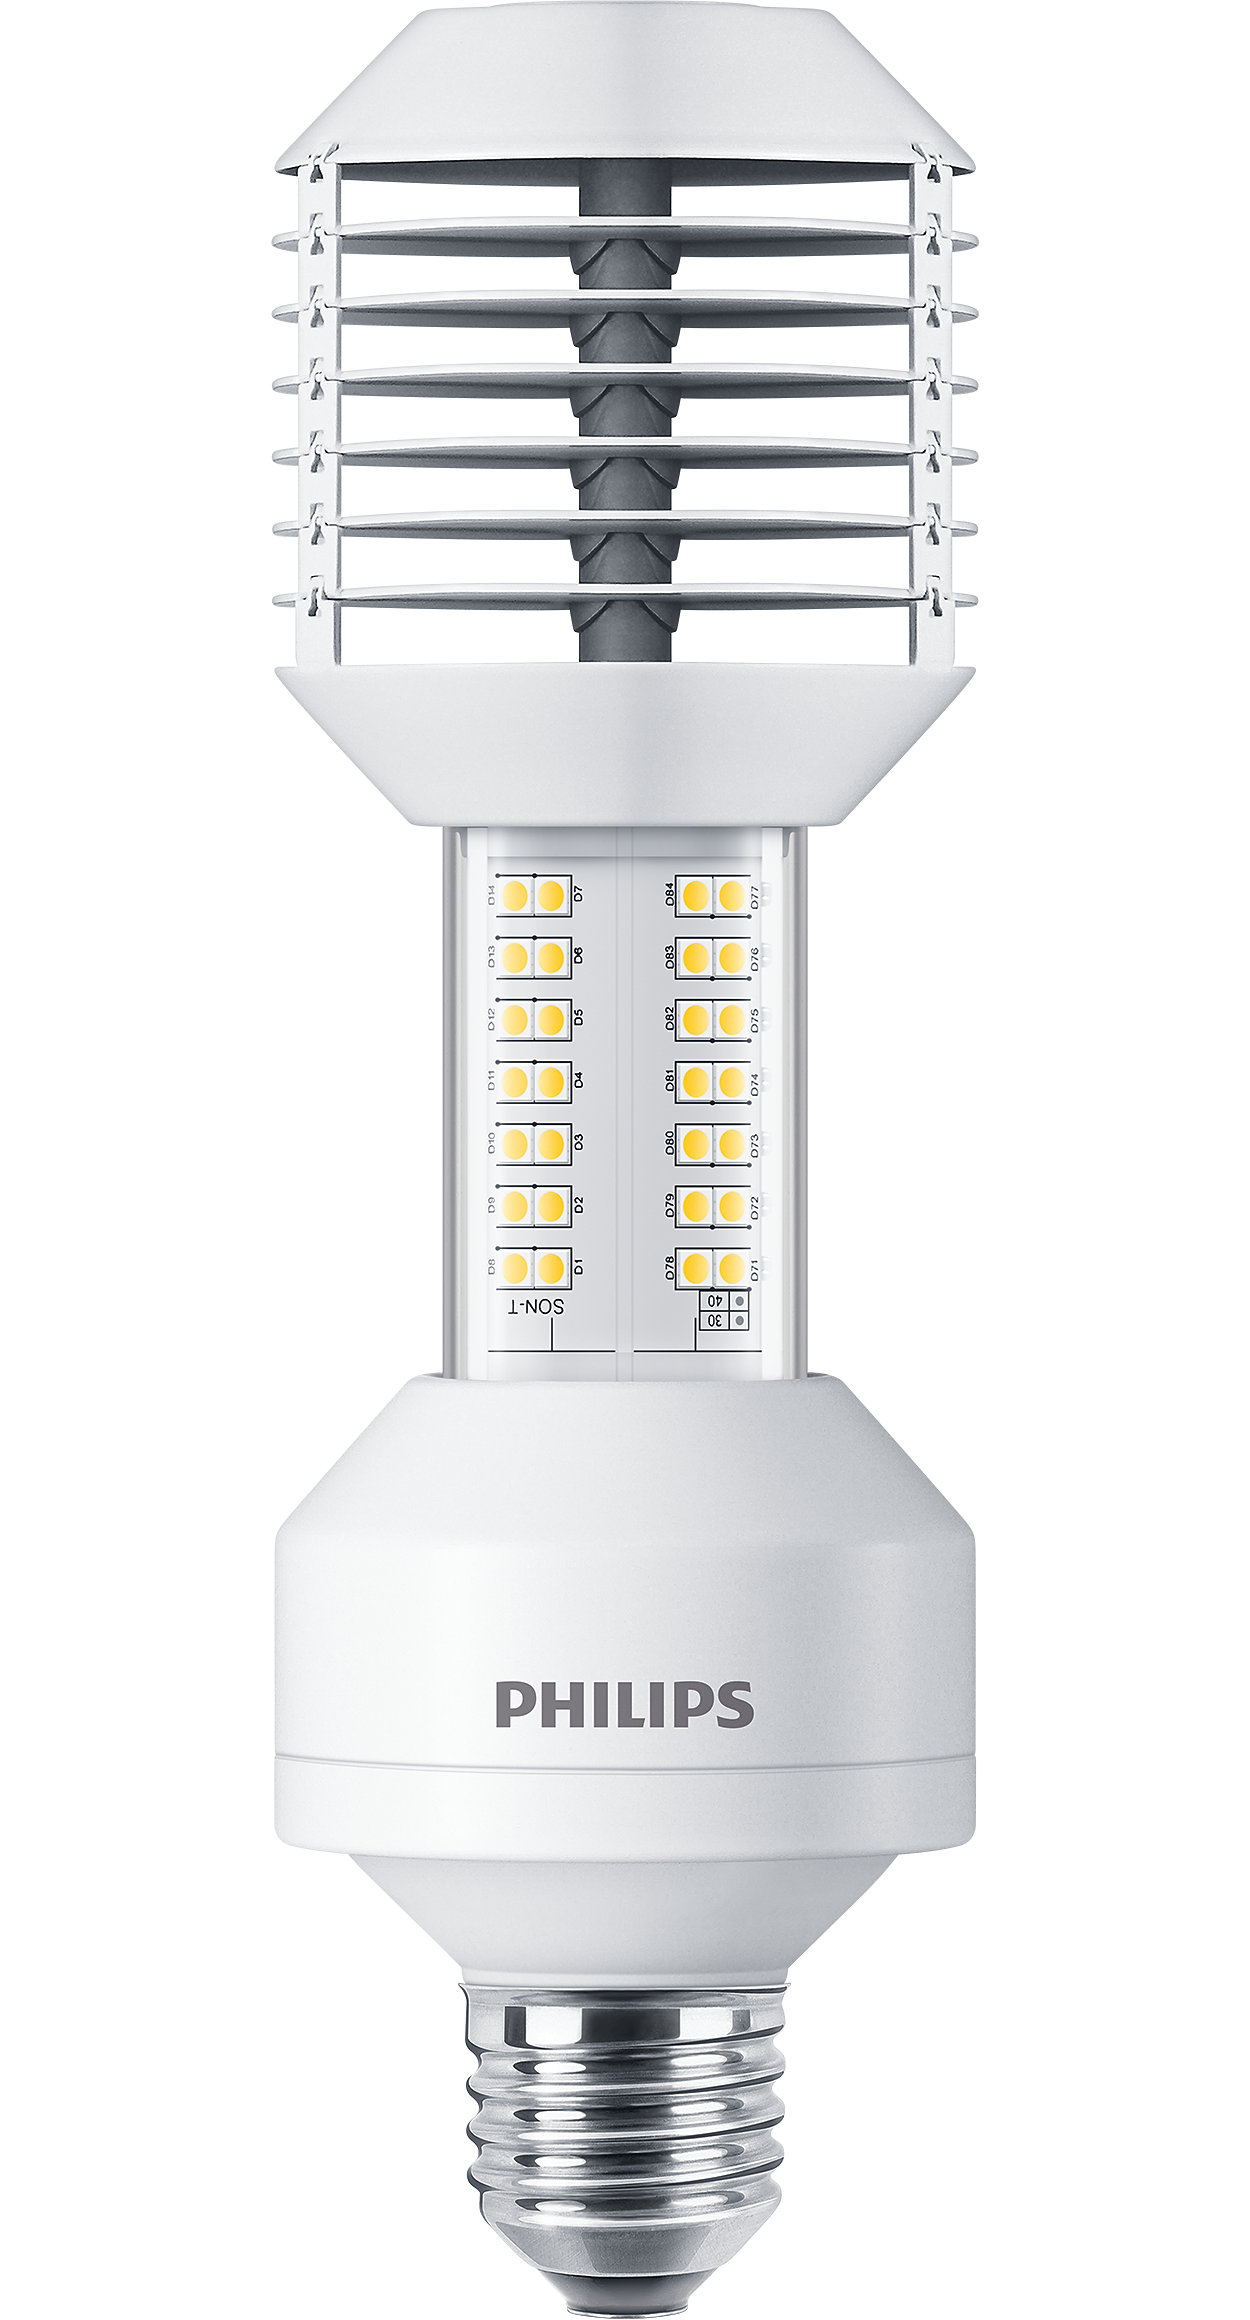 Philips TrueForce - The best LED replacement for HID and SON road lamps 